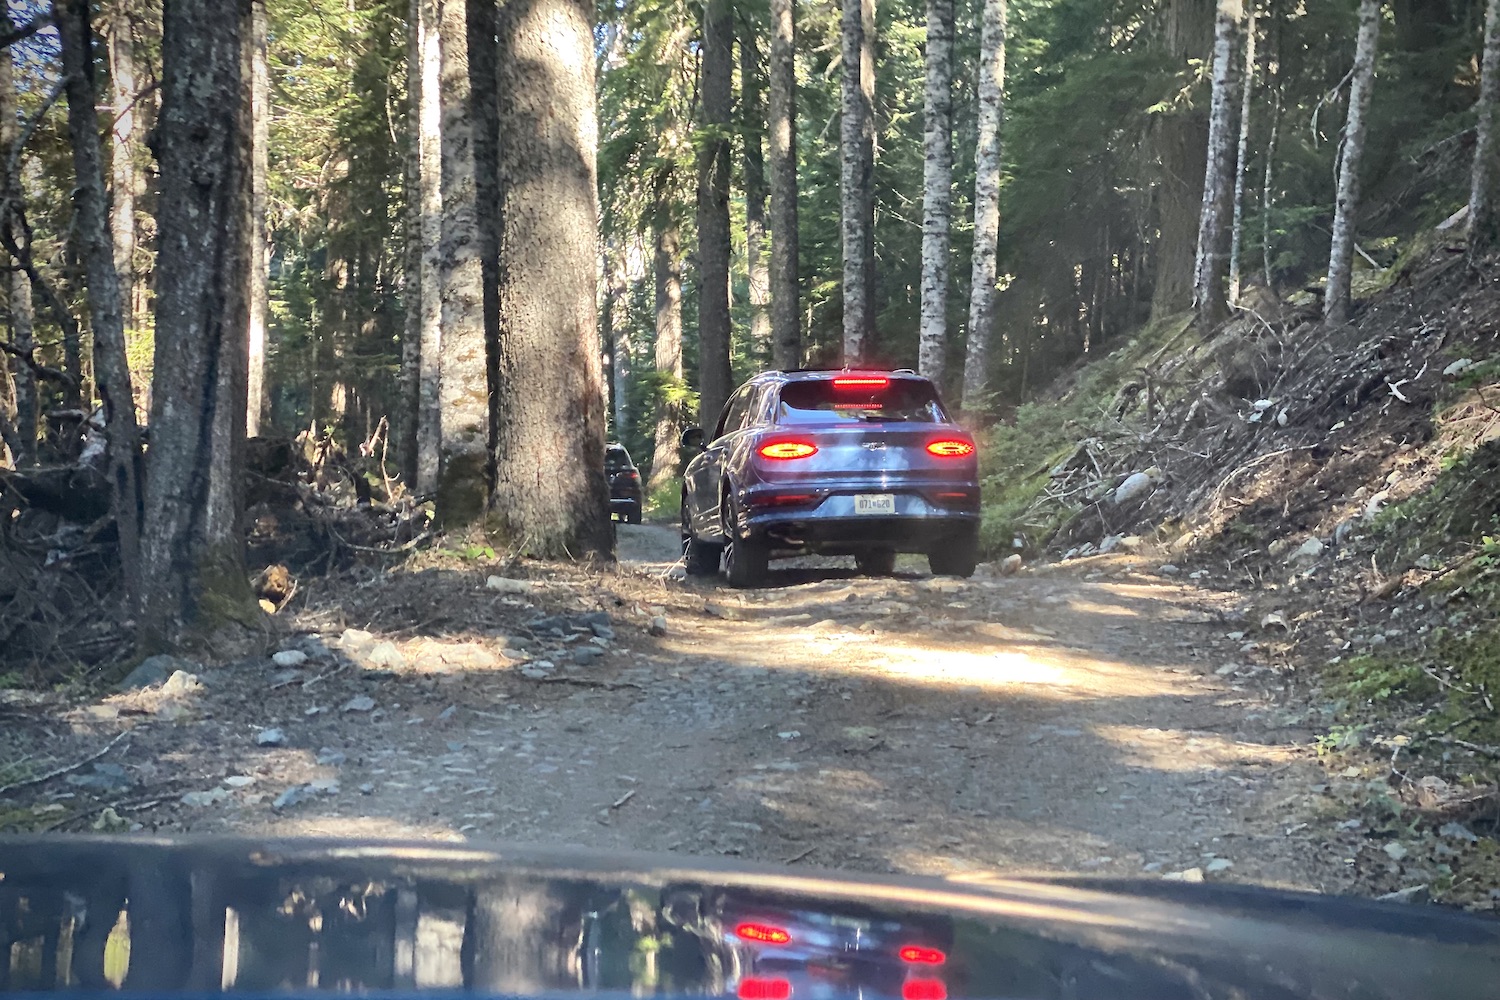 2023 Bentley Bentayga EWB off-roading through the woods near Whistler Olympic Park on a gravel trail with trees surrounding the 